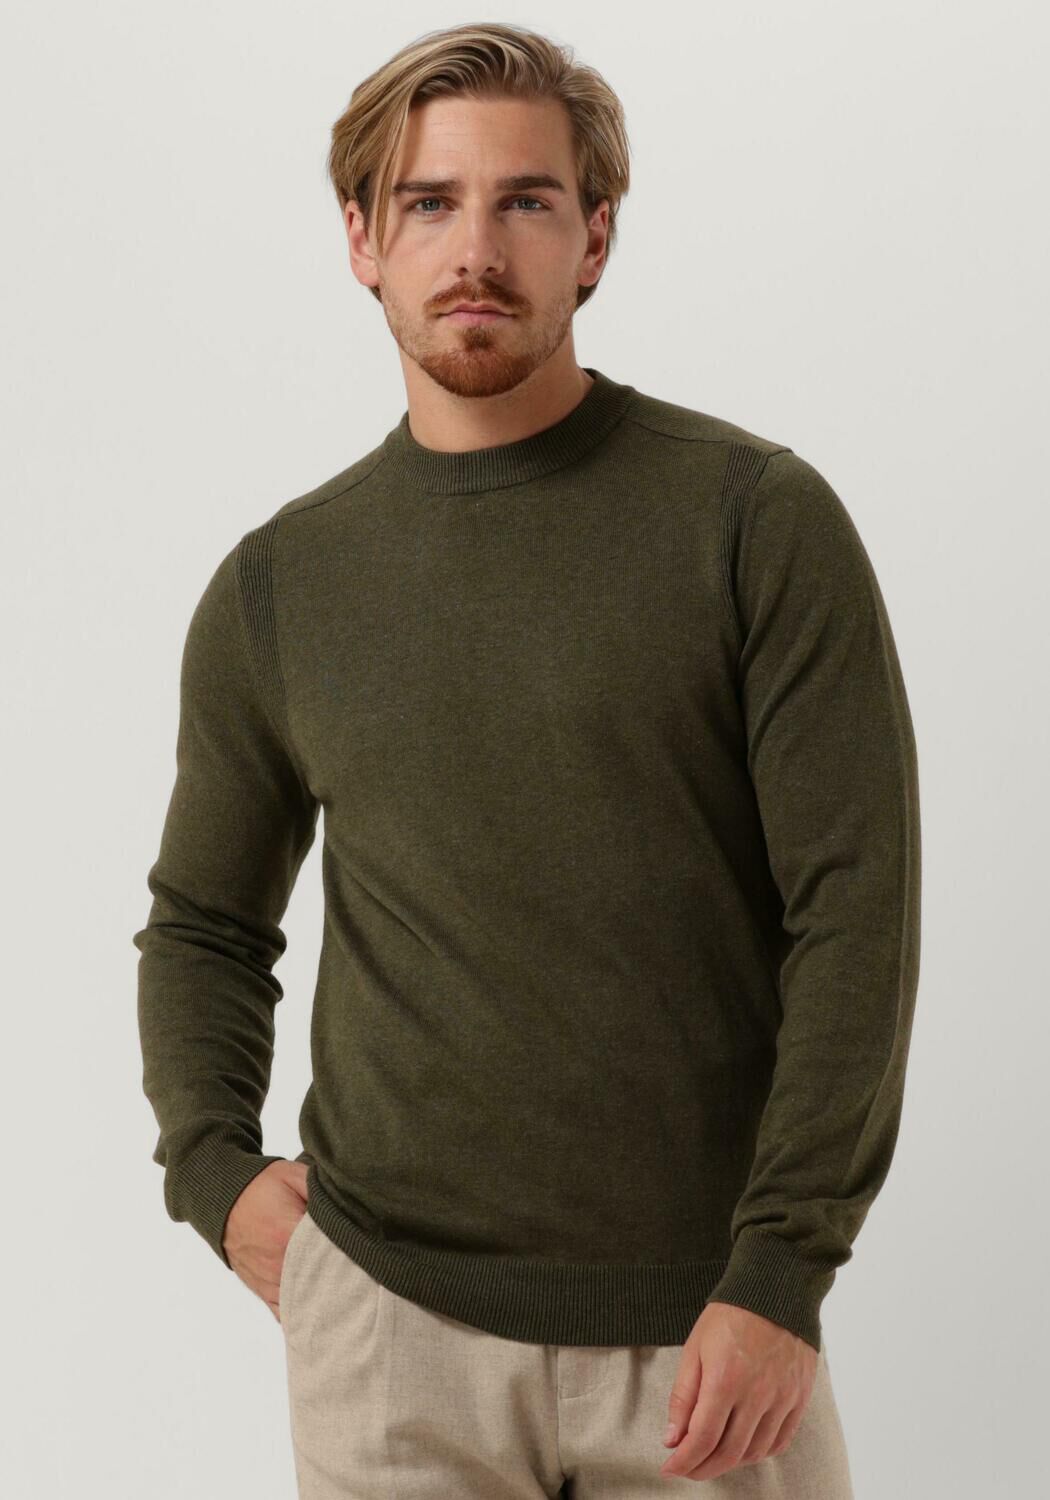 Weekday Coltrui khaki casual uitstraling Mode Sweaters Coltruien 